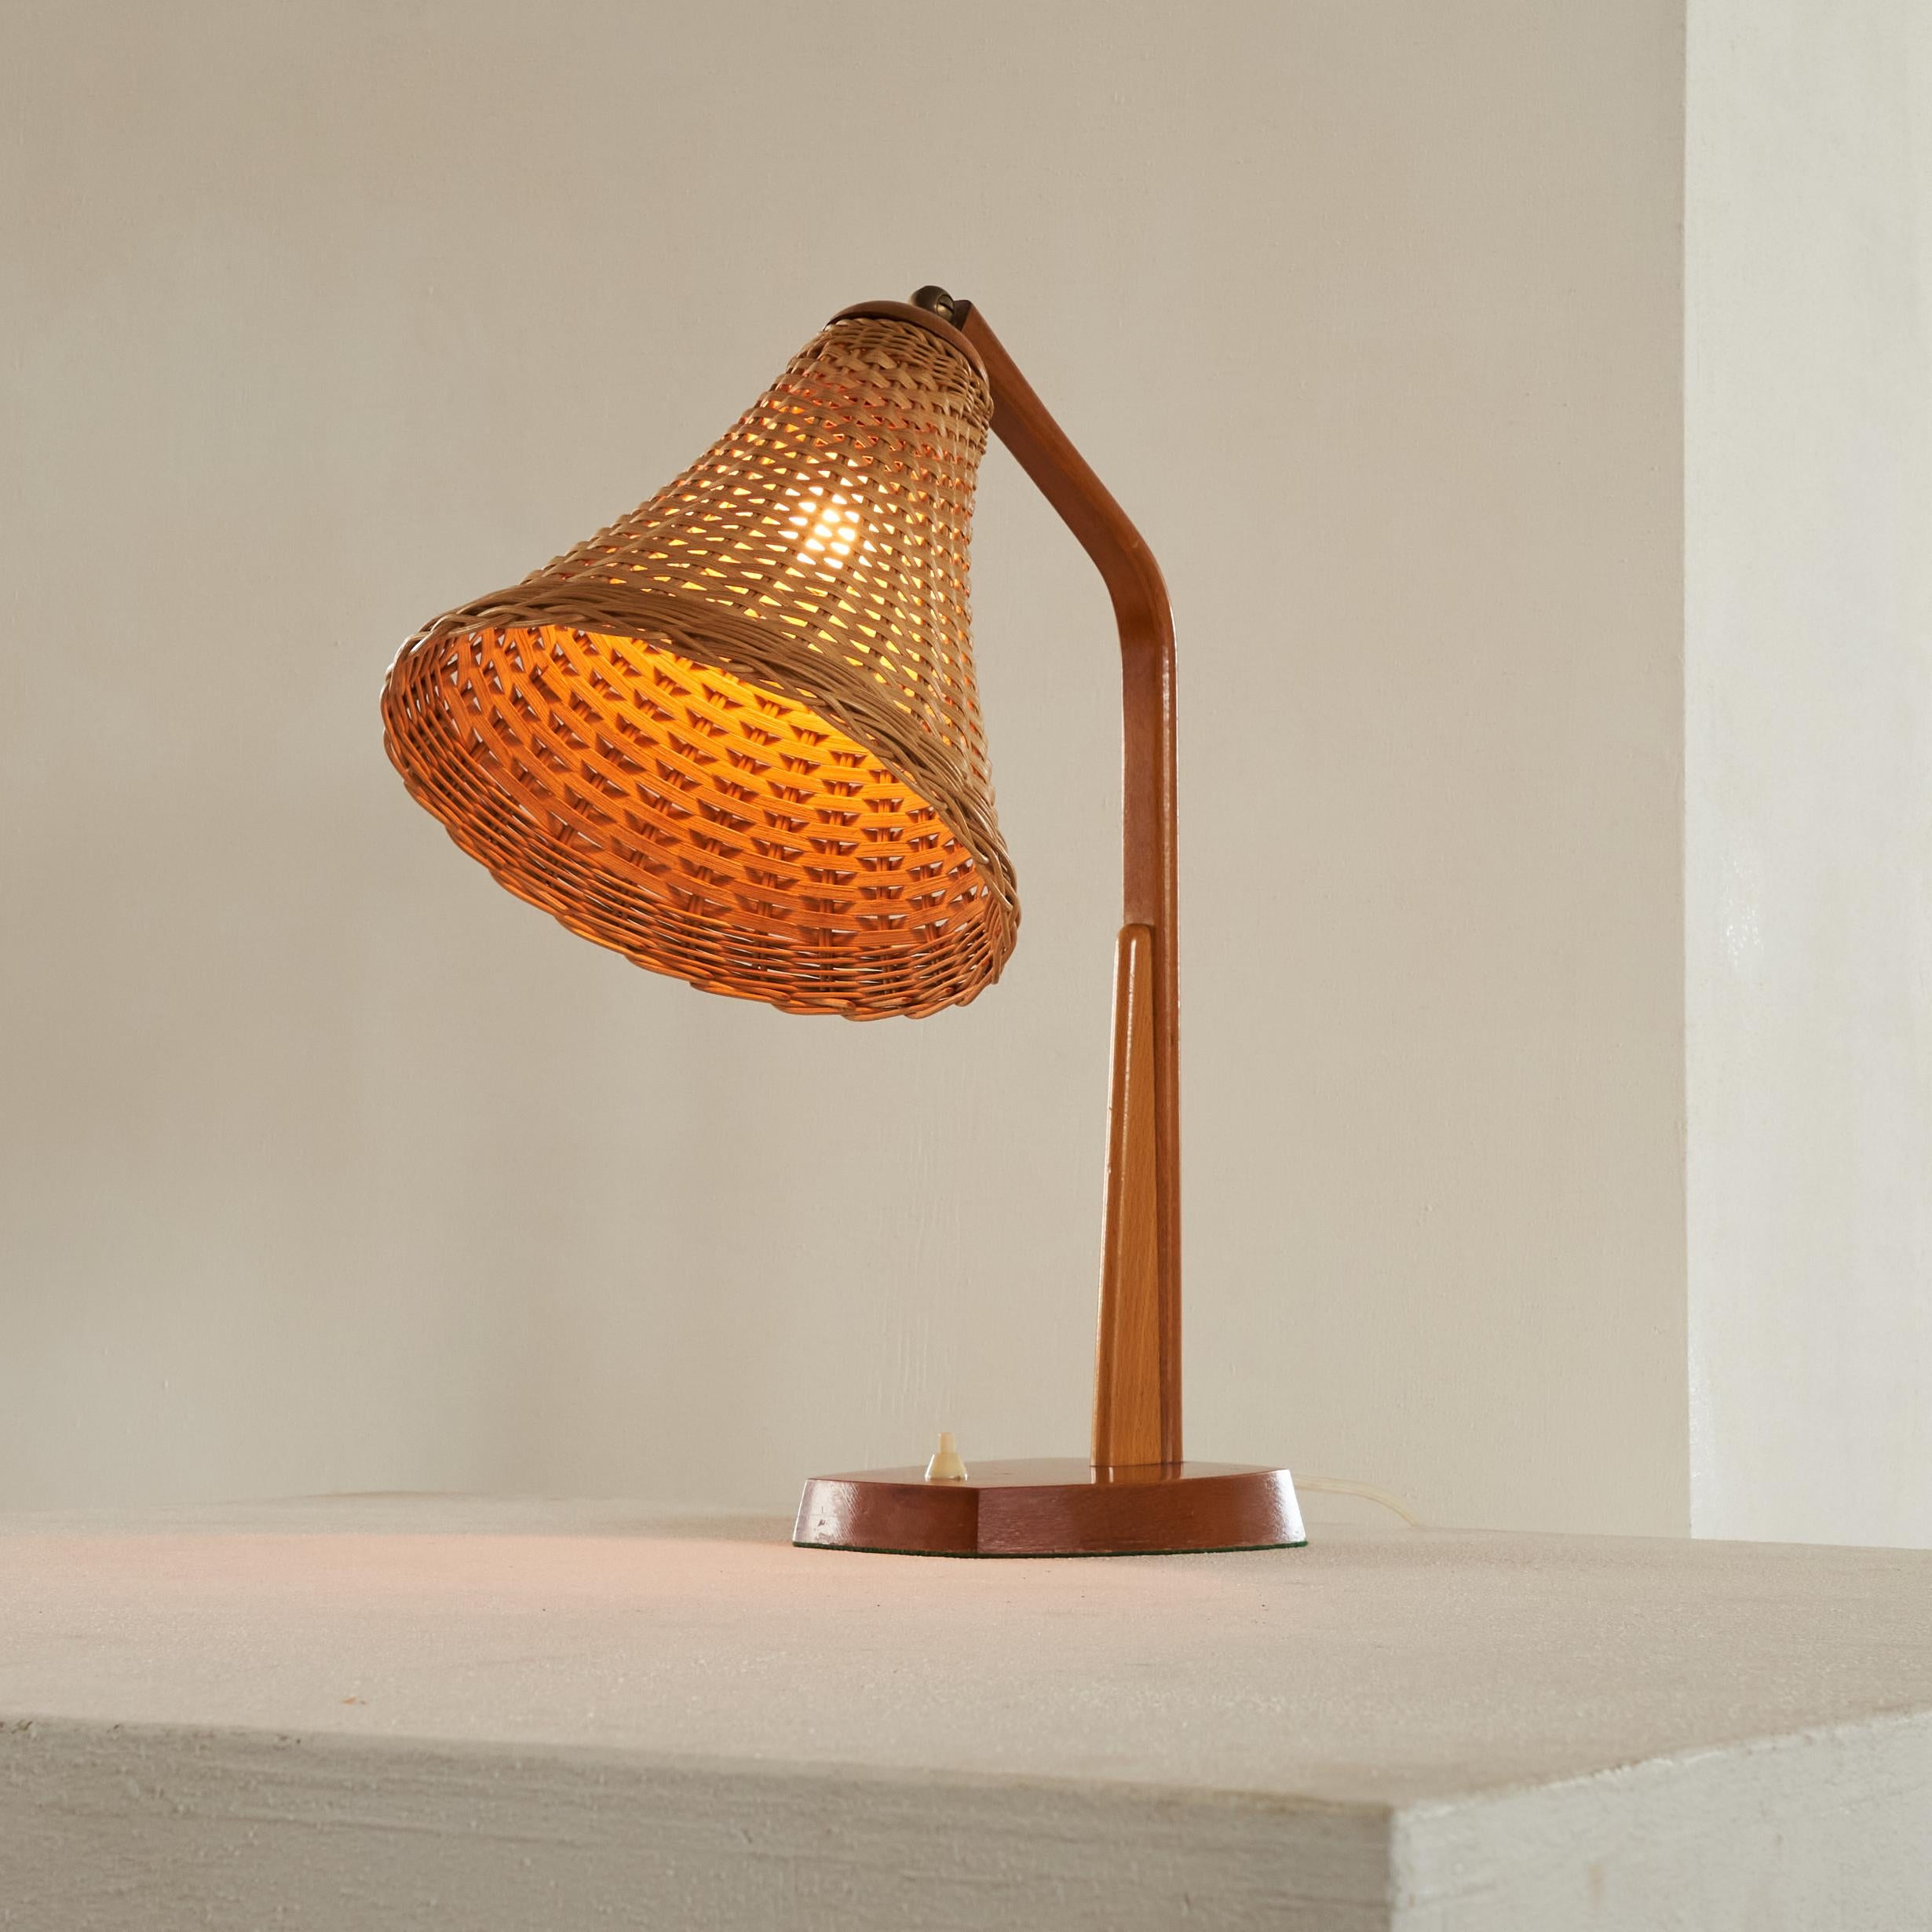 Mid Century Desk Lamp in Rattan and Wood 1960s.

Wonderful mid-century desk lamp in wood and rattan. Beautiful shaped wooden frame and a rattan shade which gives very warm light - included a very atmospheric light on the surroundings. Very 1960s,